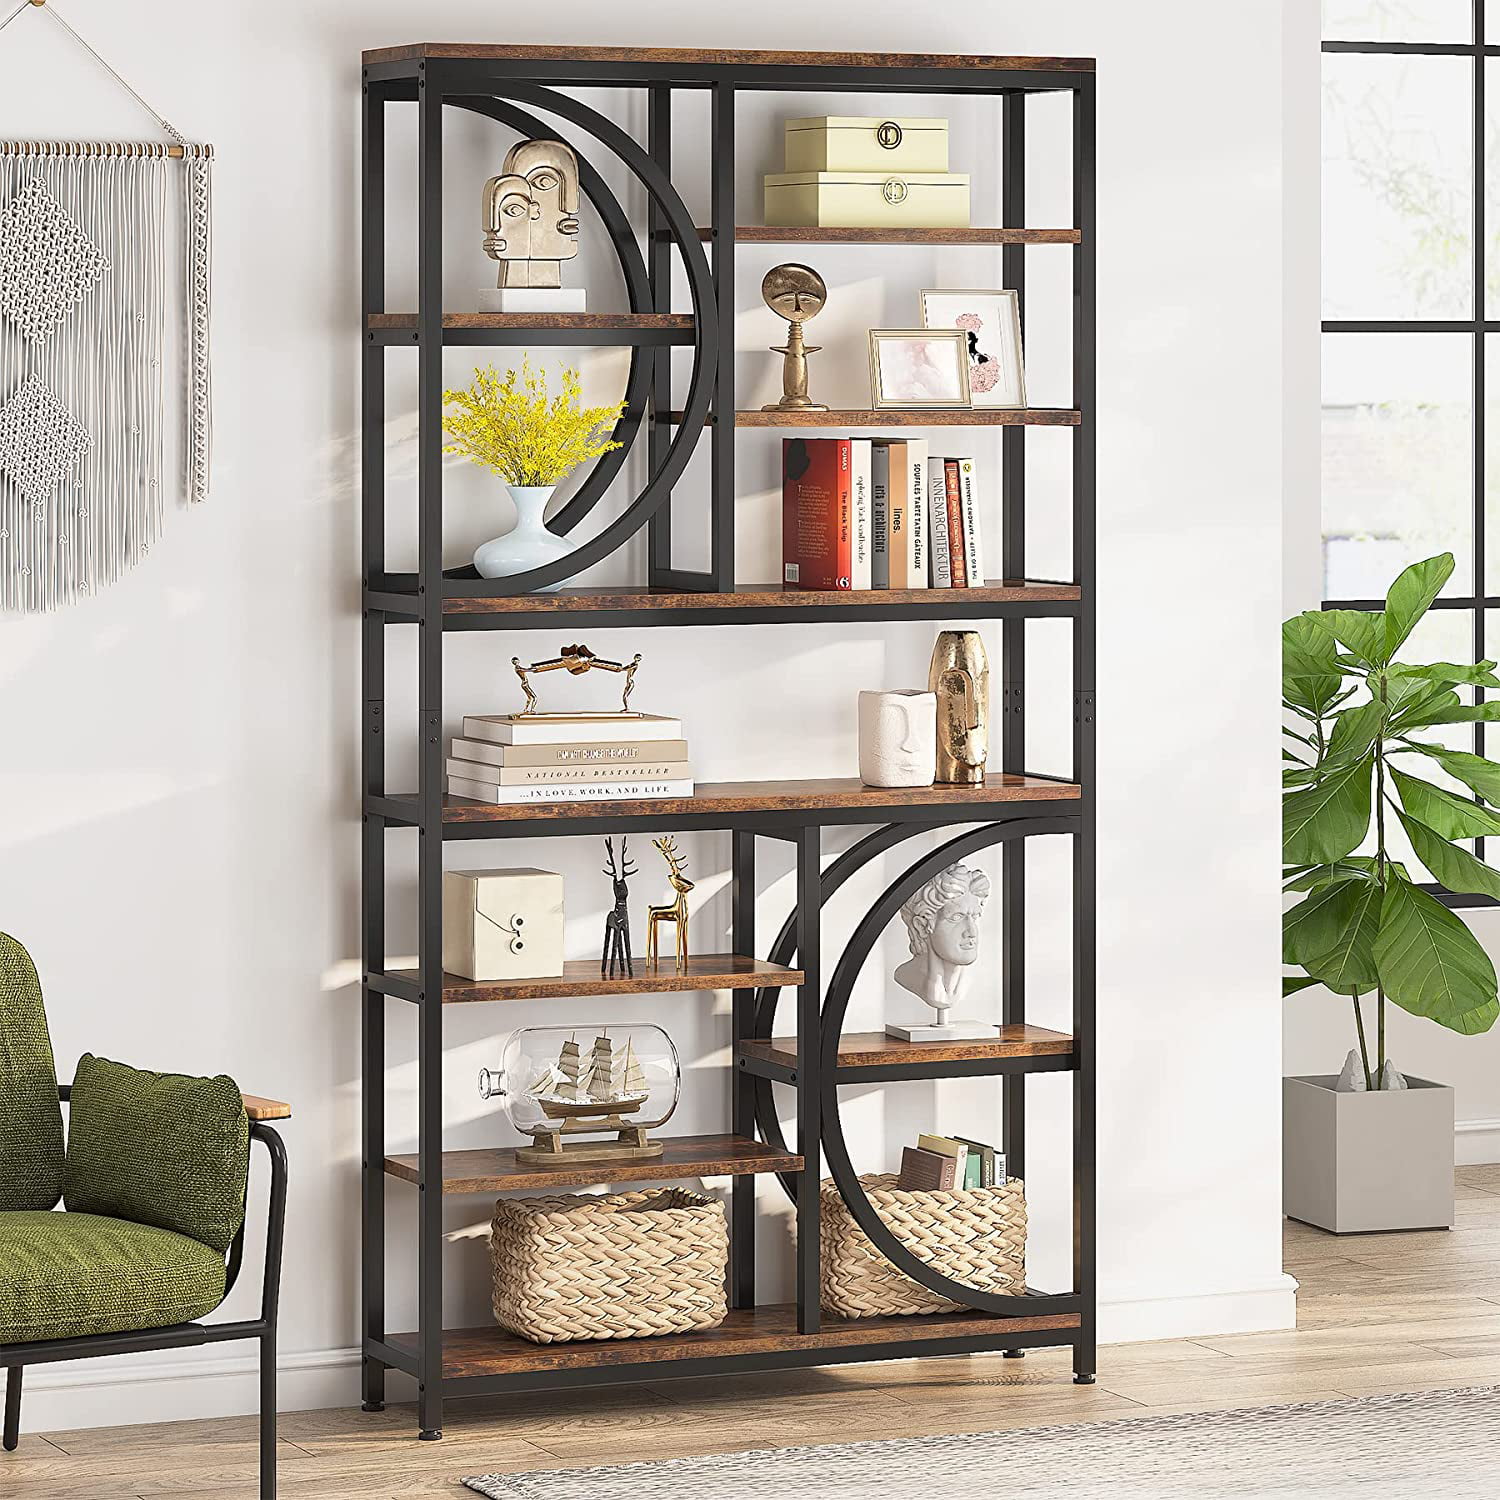 Tribesigns Bookshelf, Industrial 8-Tier Etagere Bookcases, Rustic Tall Book Shelf  Open Display Shelves, Wood Look Accent Shelving Unit with Metal Frame for  Home Office, Living Room, Bedroom